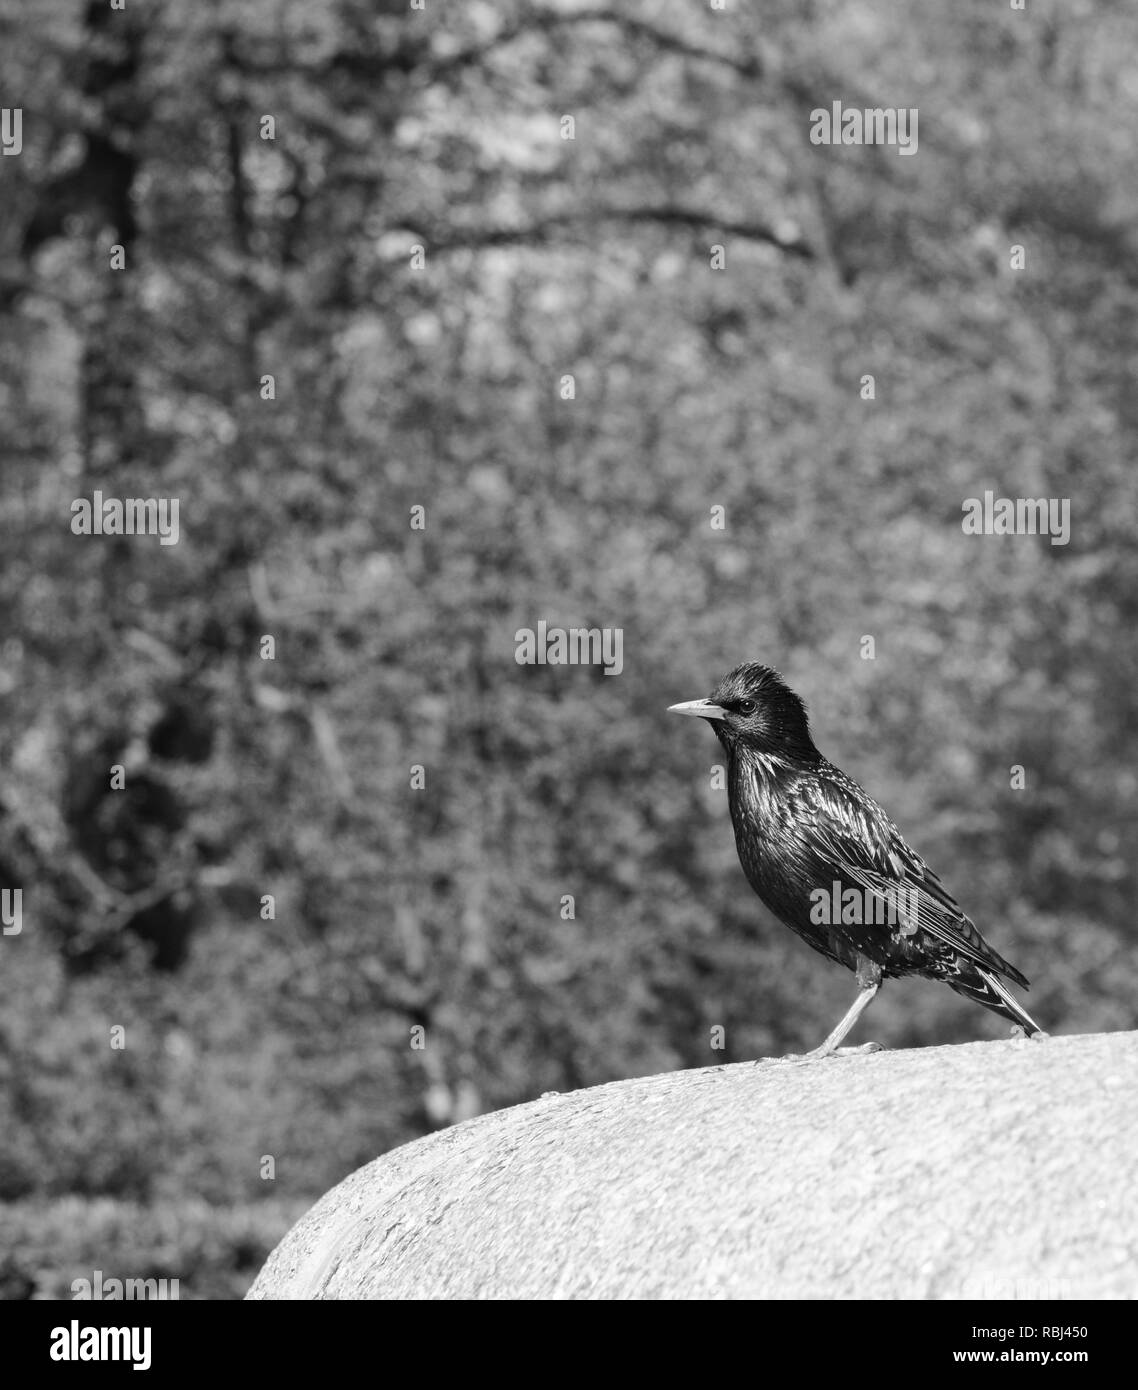 Starling with iridescent feathers stands on stone ledge in a park - monochrome processing Stock Photo